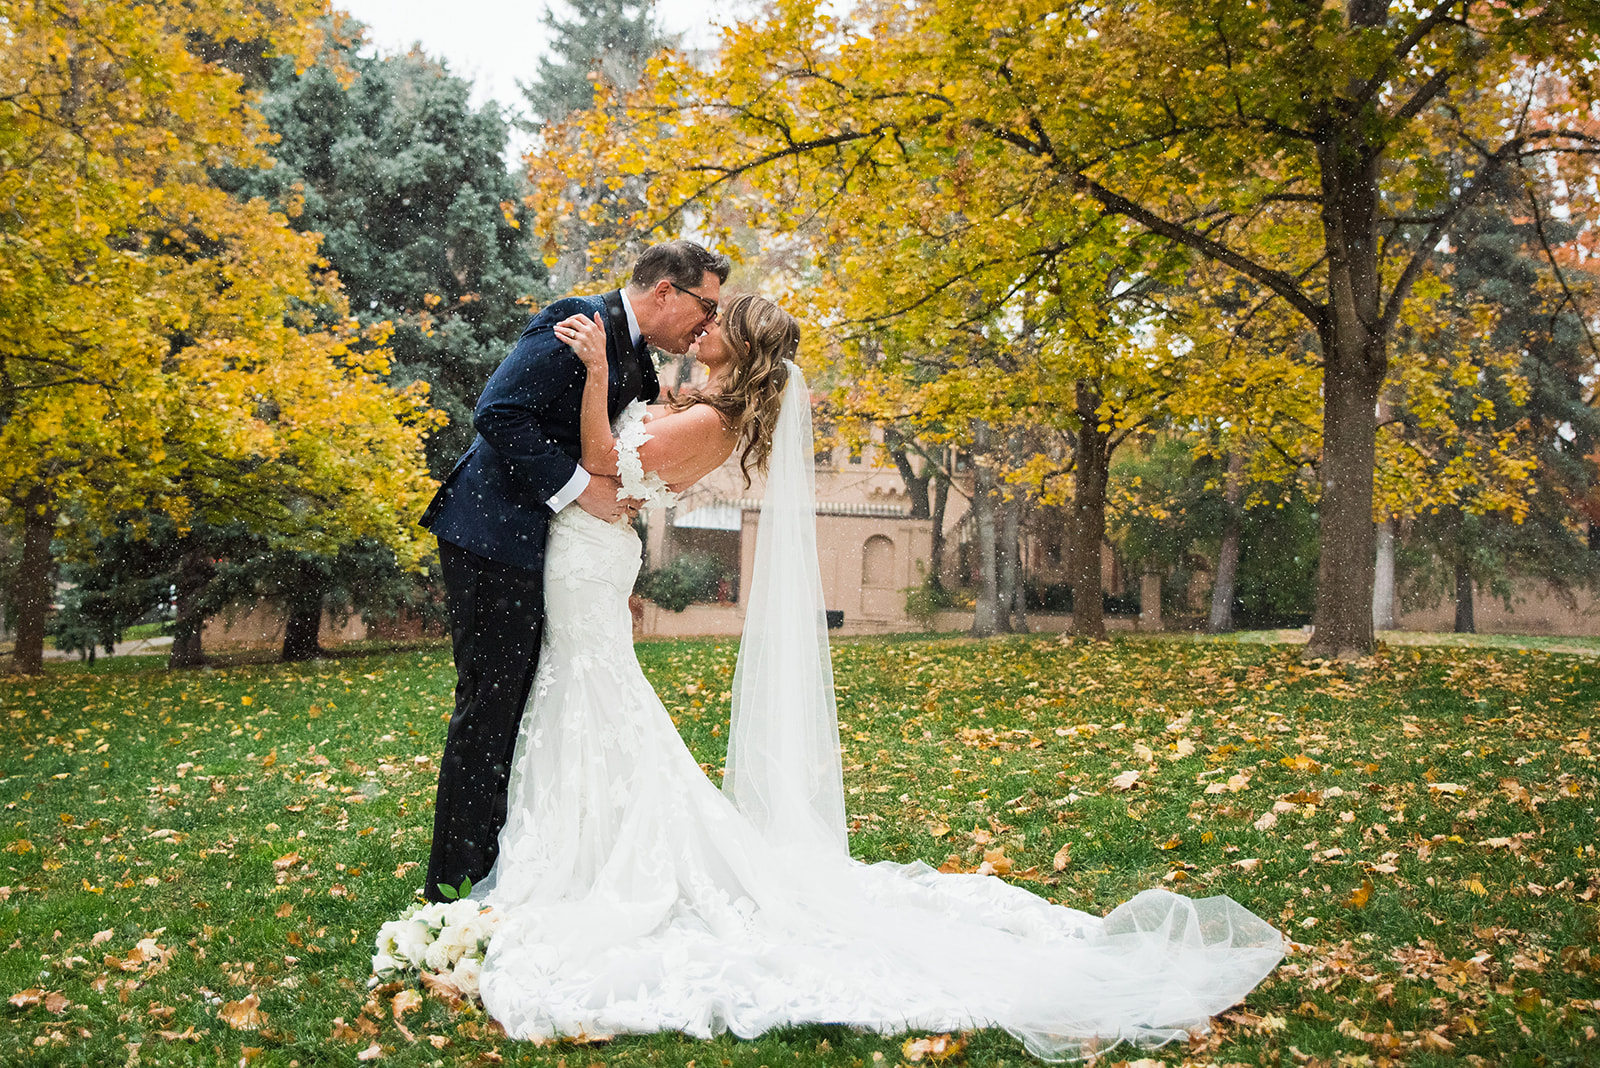 A groom dips his bride for a kiss with the yellow fall leaves in the background.